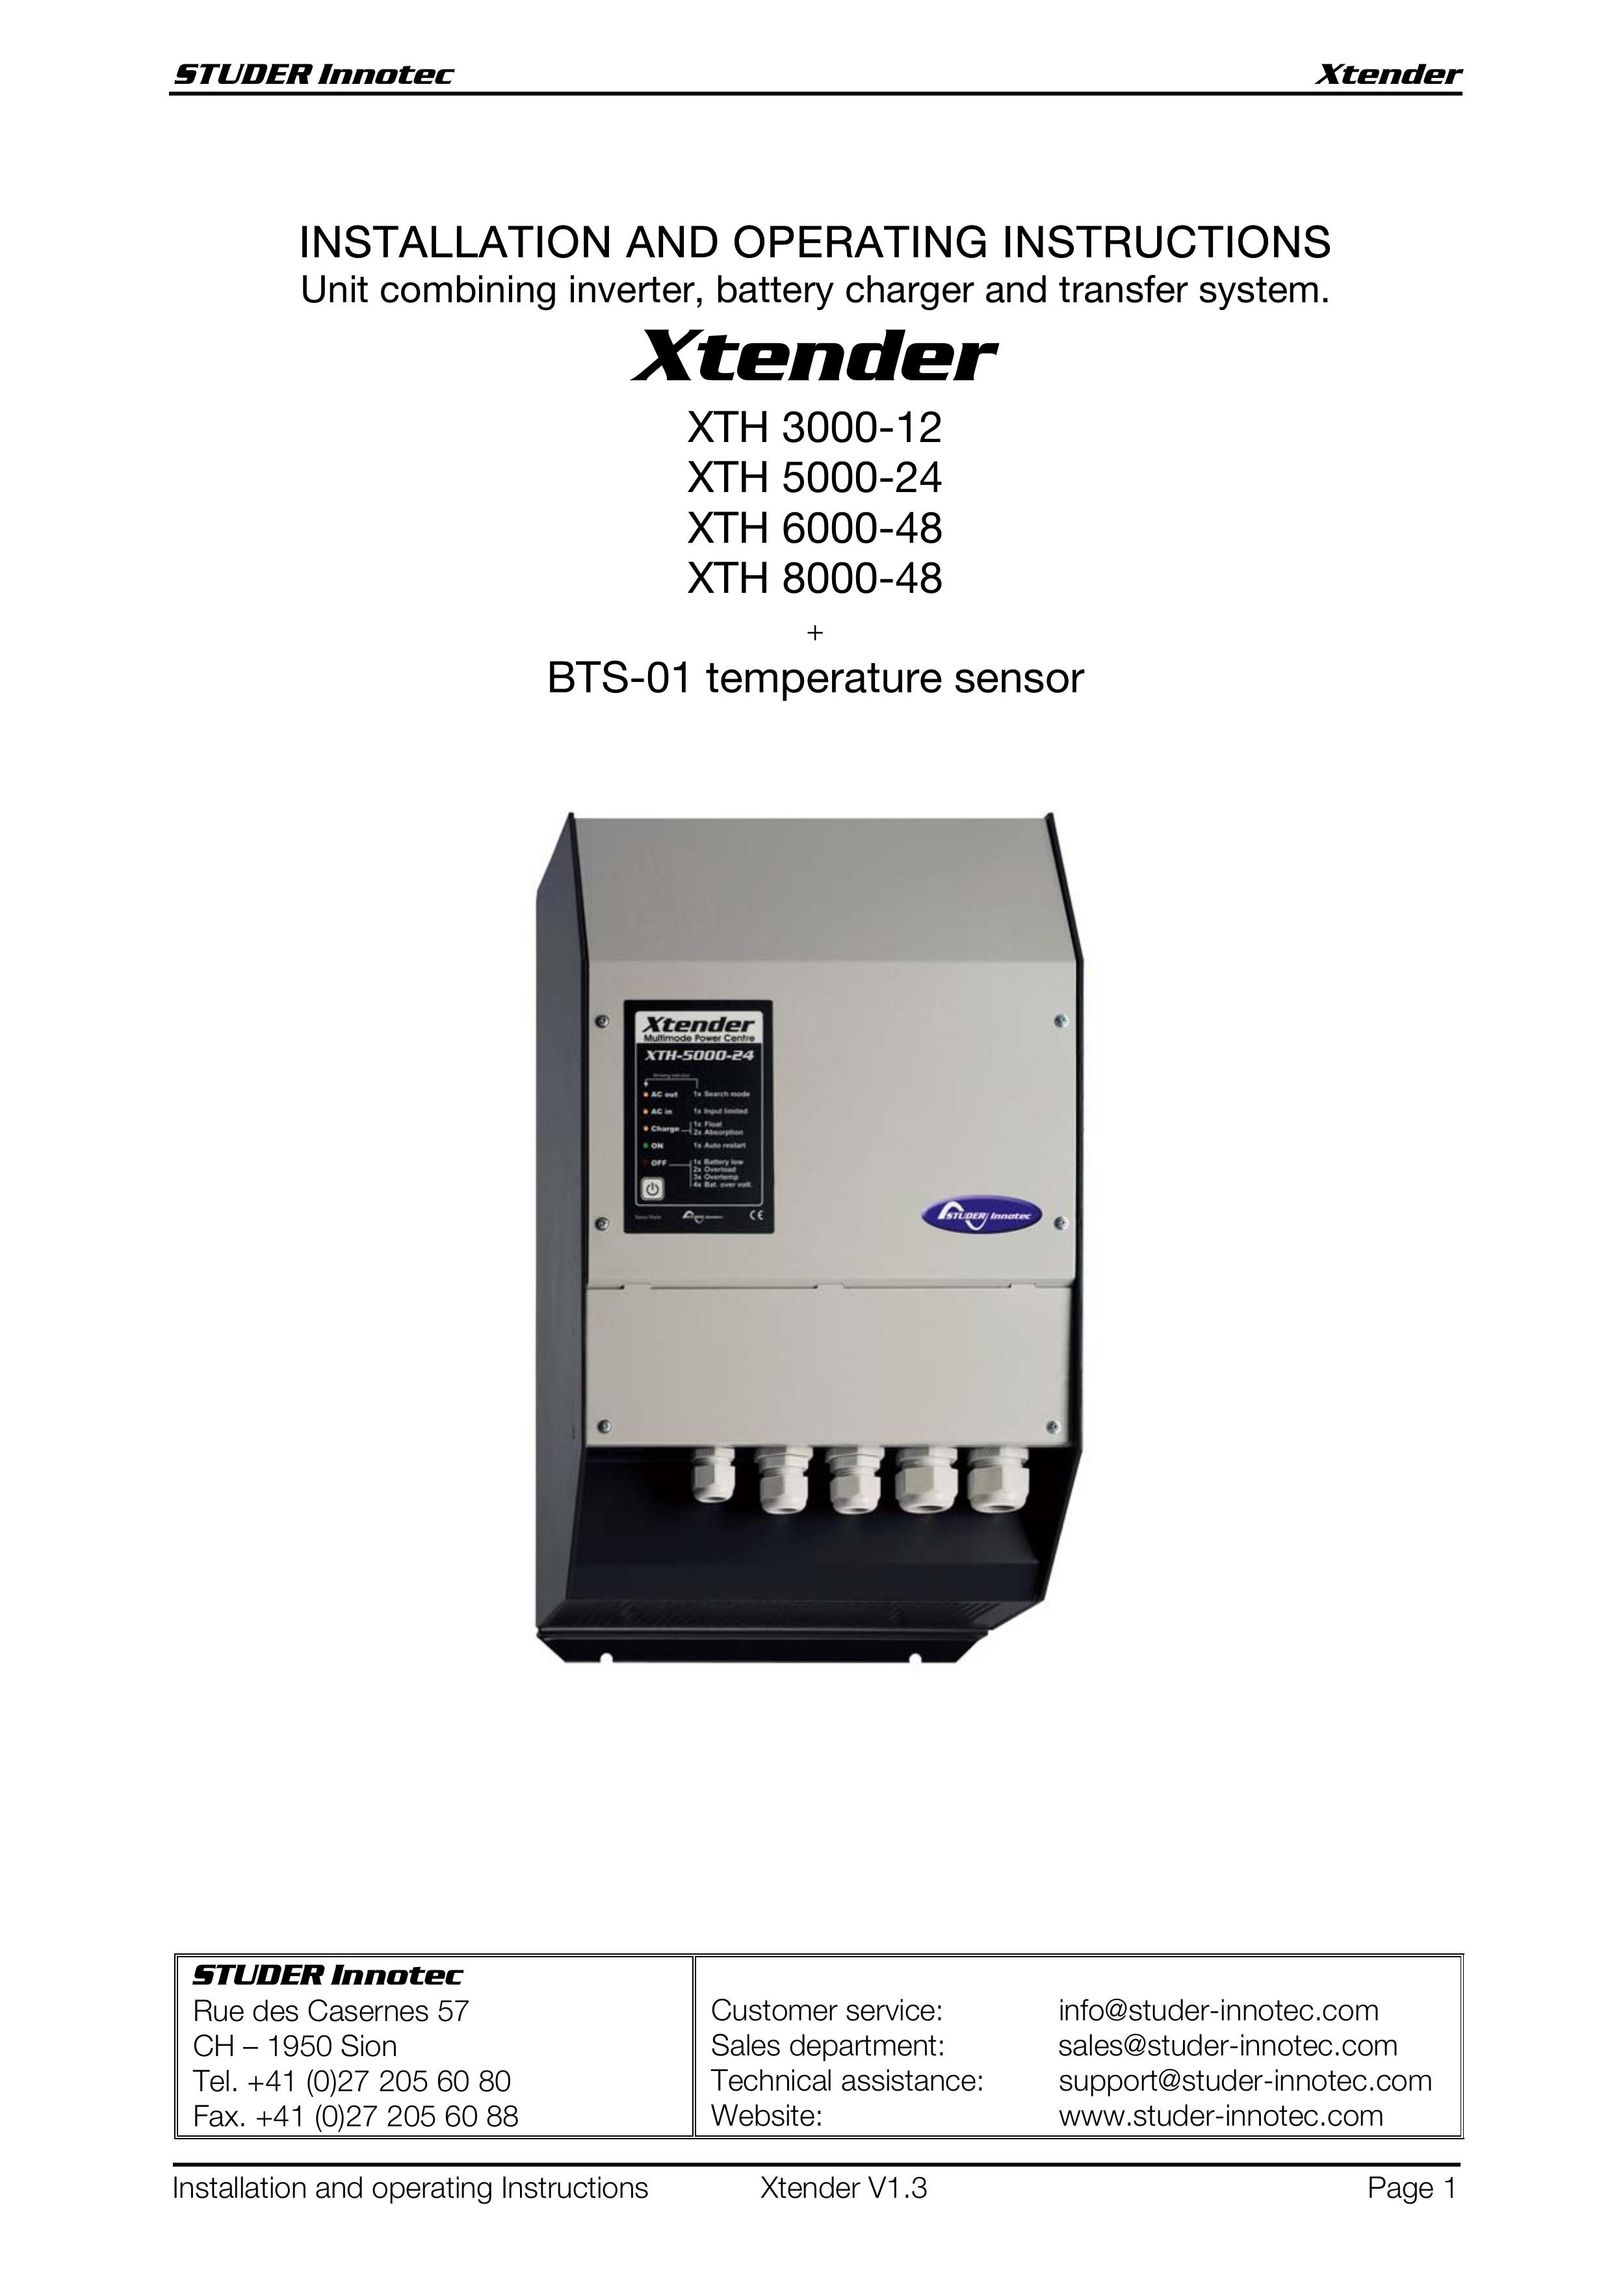 Studer Innotec XTH 6000-48 Battery Charger User Manual